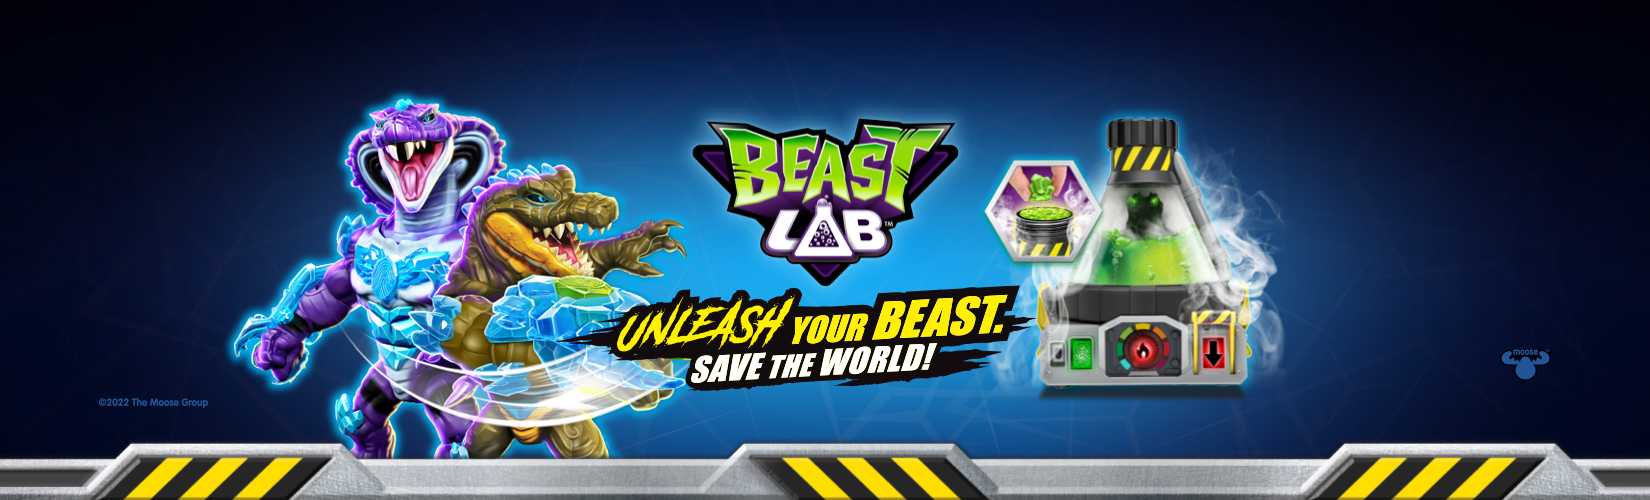 Beast Lab, Release your Beast - Save the World